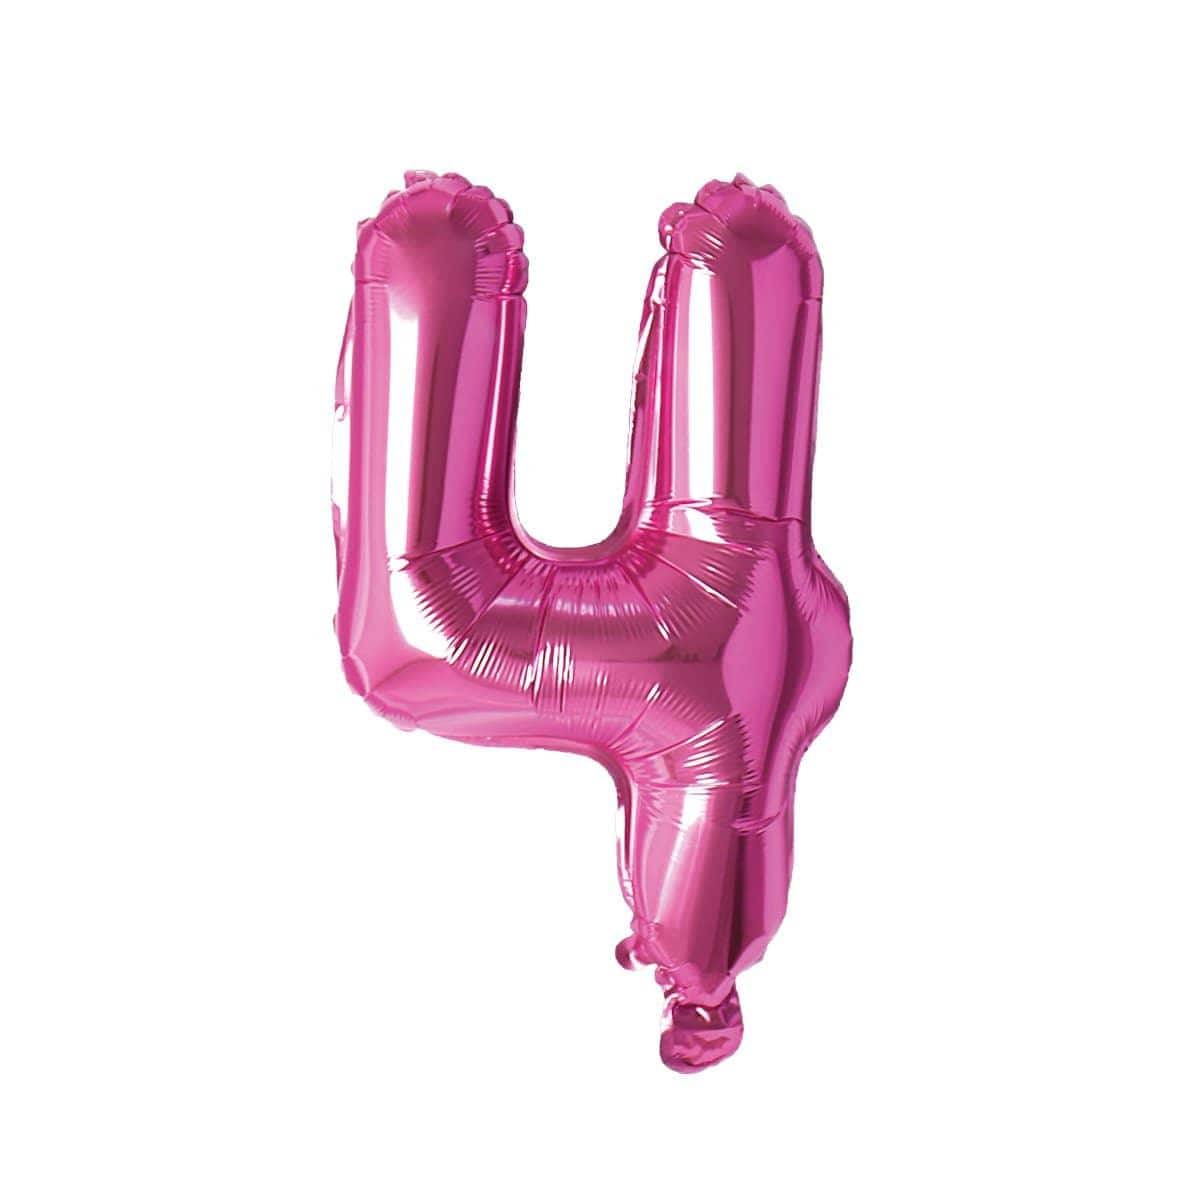 Buy Balloons Pink Number 4 Foil Balloon, 16 Inches sold at Party Expert